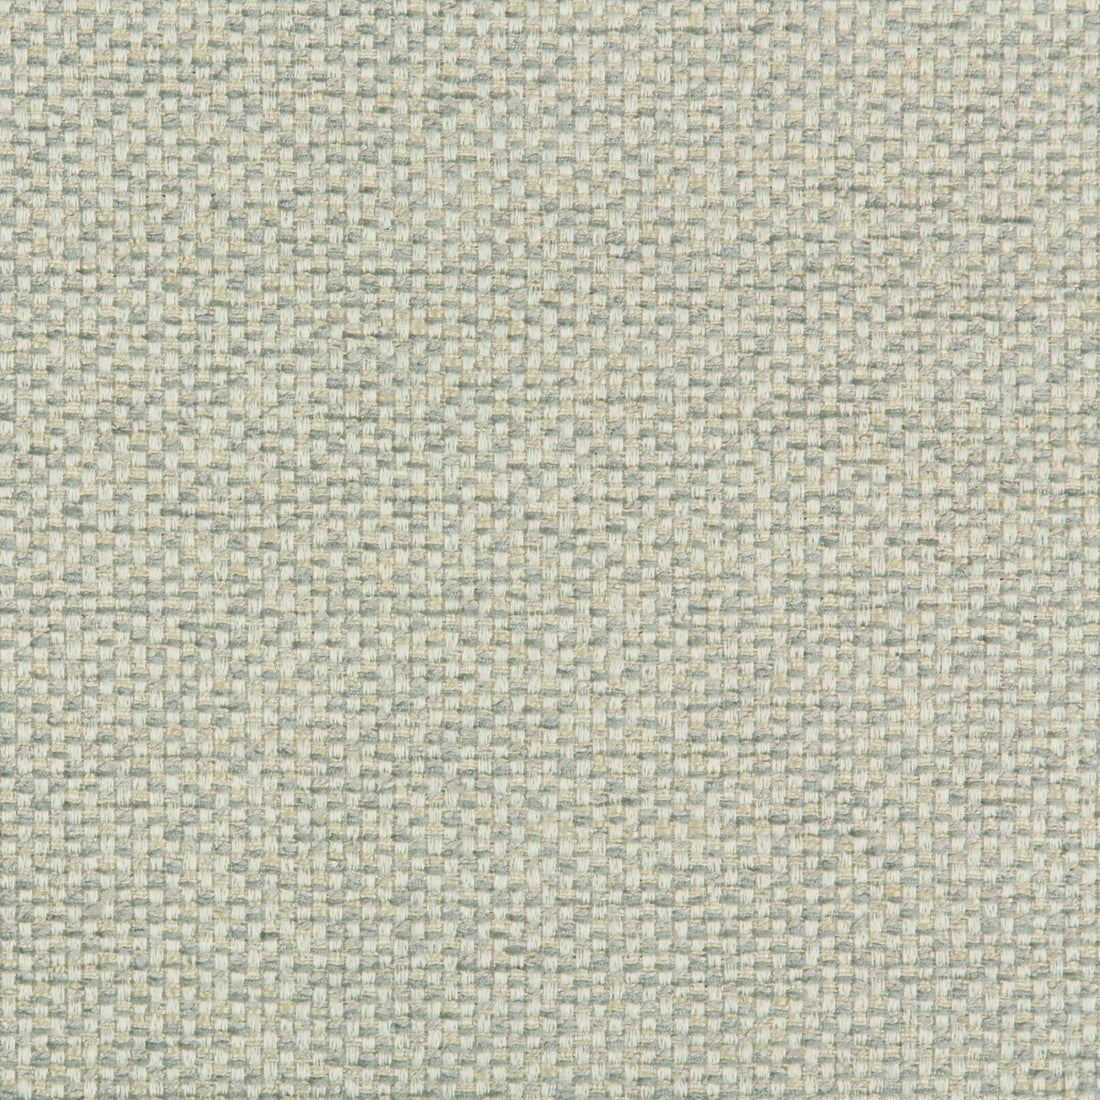 Kravet Contract fabric in 35053-1611 color - pattern 35053.1611.0 - by Kravet Contract in the Incase Crypton Gis collection